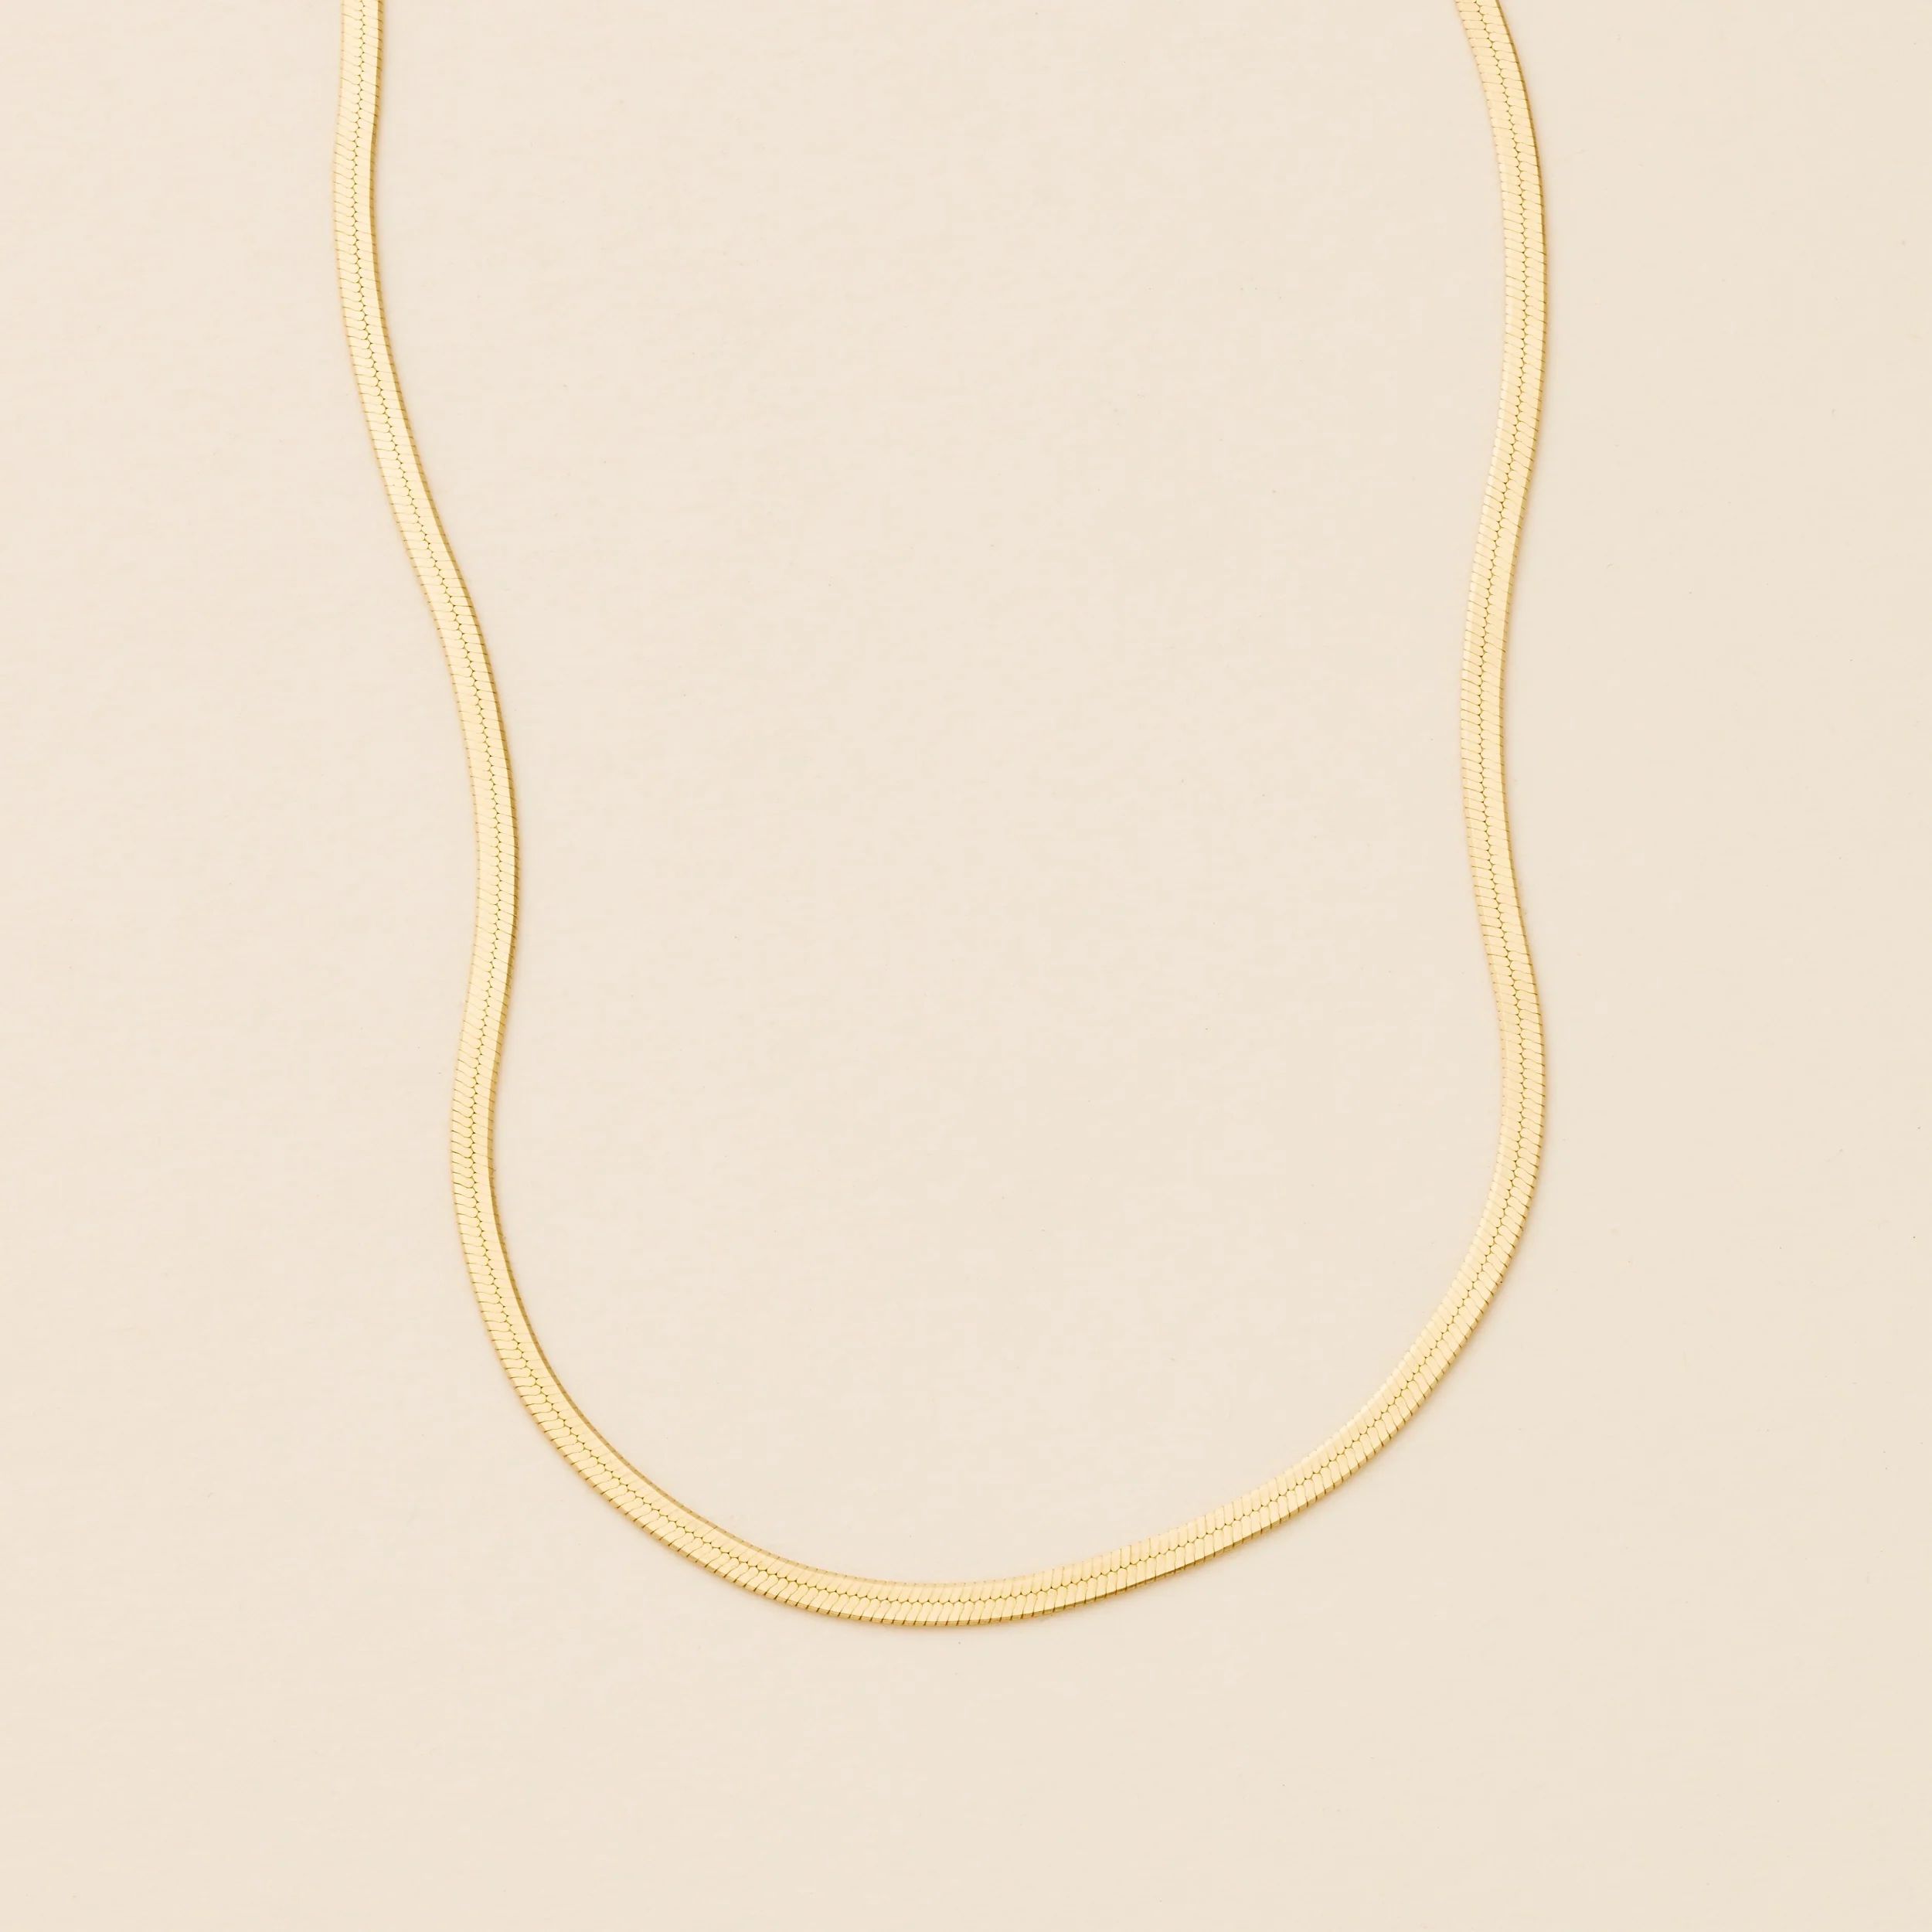 Thin Hera Chain Necklace - 1.9mm | Made by Mary (US)